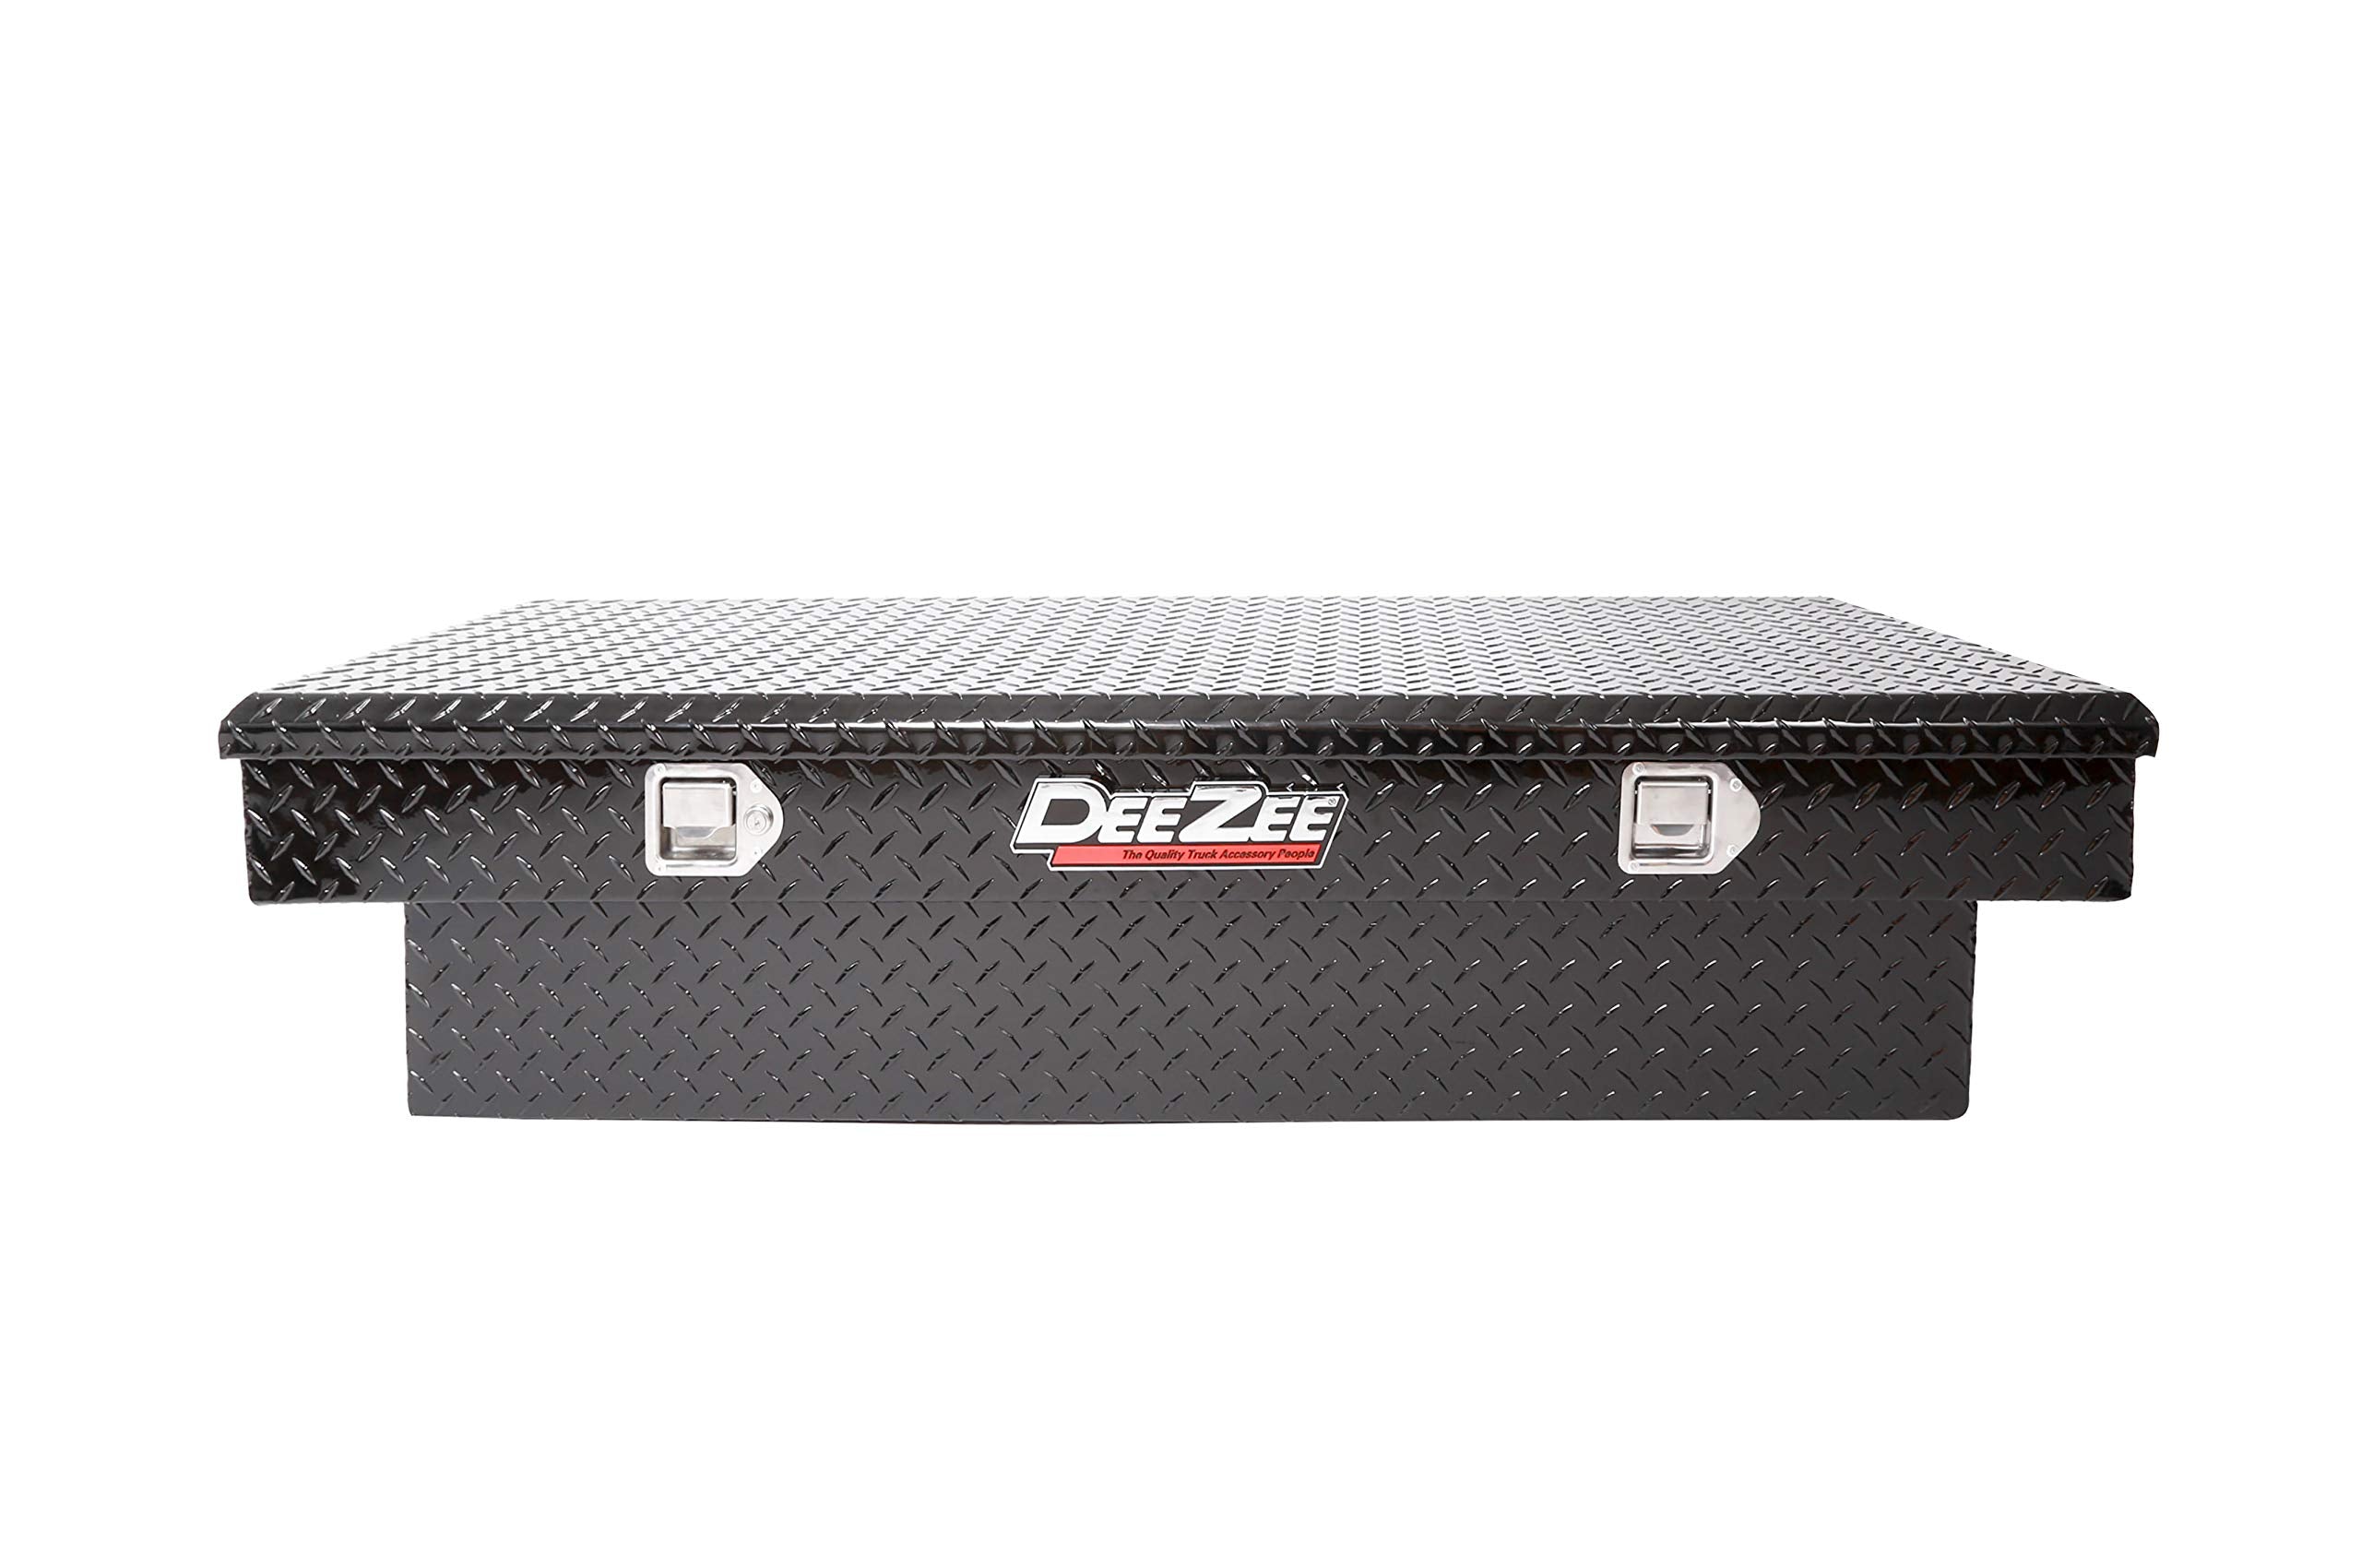 Dee Zee DZ8163B Red Label Crossover Tool Box